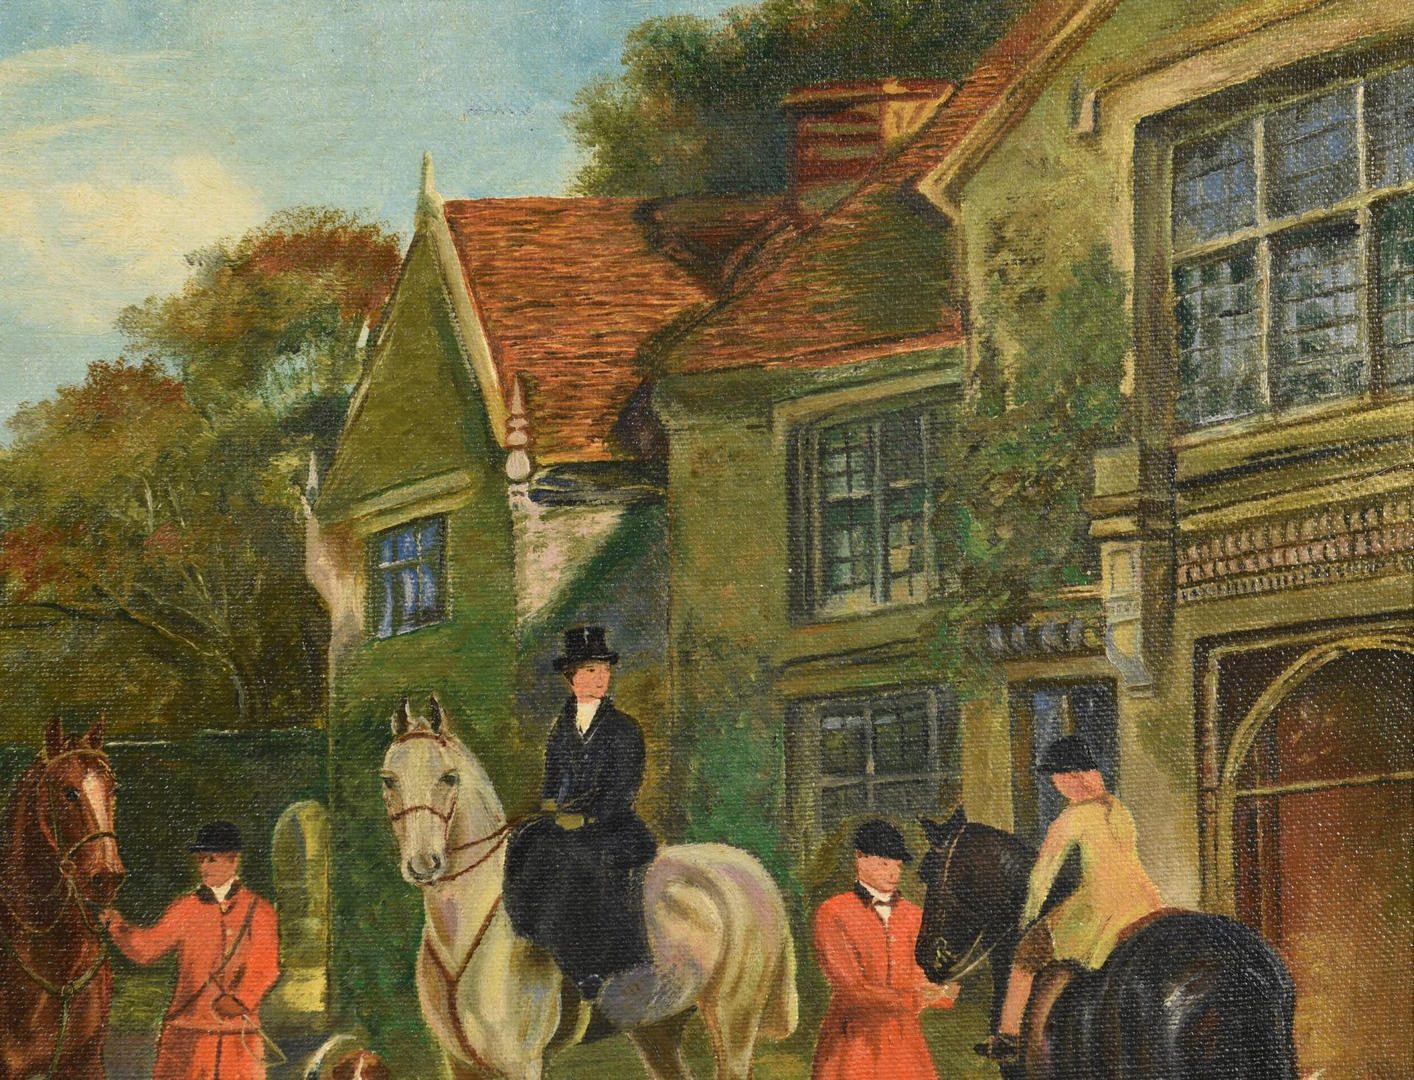 Lot 436: English Oil on Canvas Hunting Scene